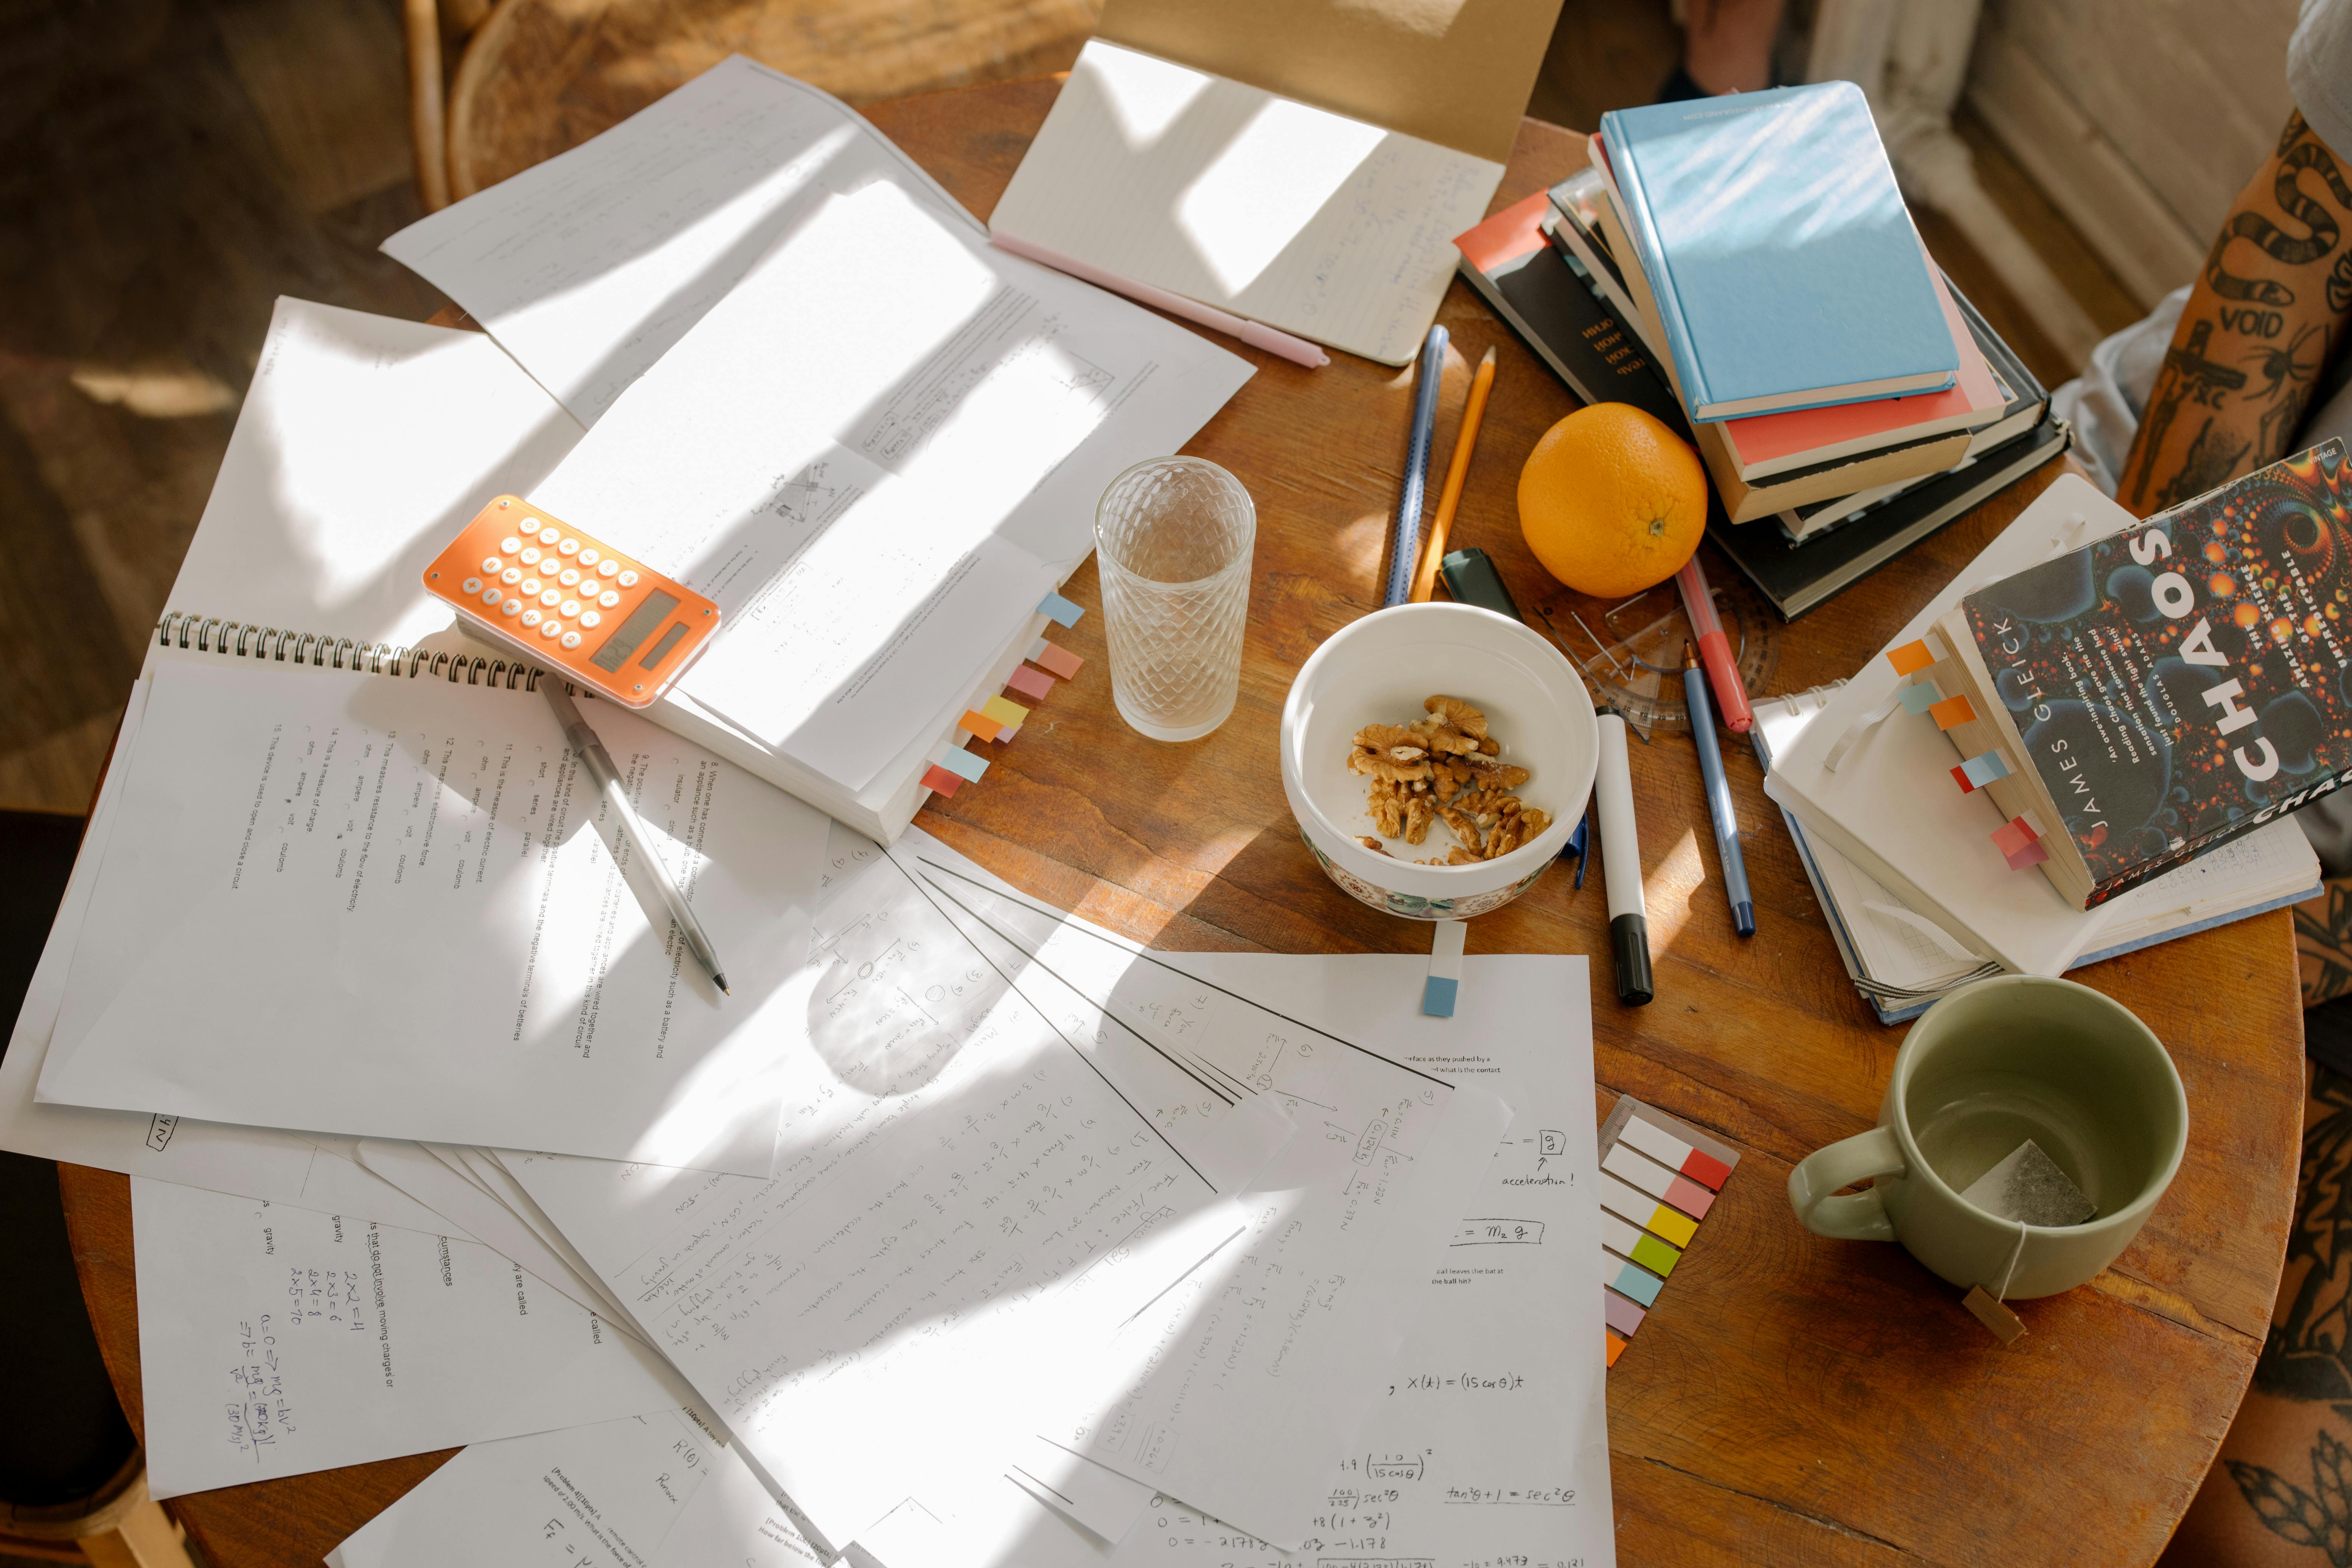 organizing your online business inevitably means organizing paperwork